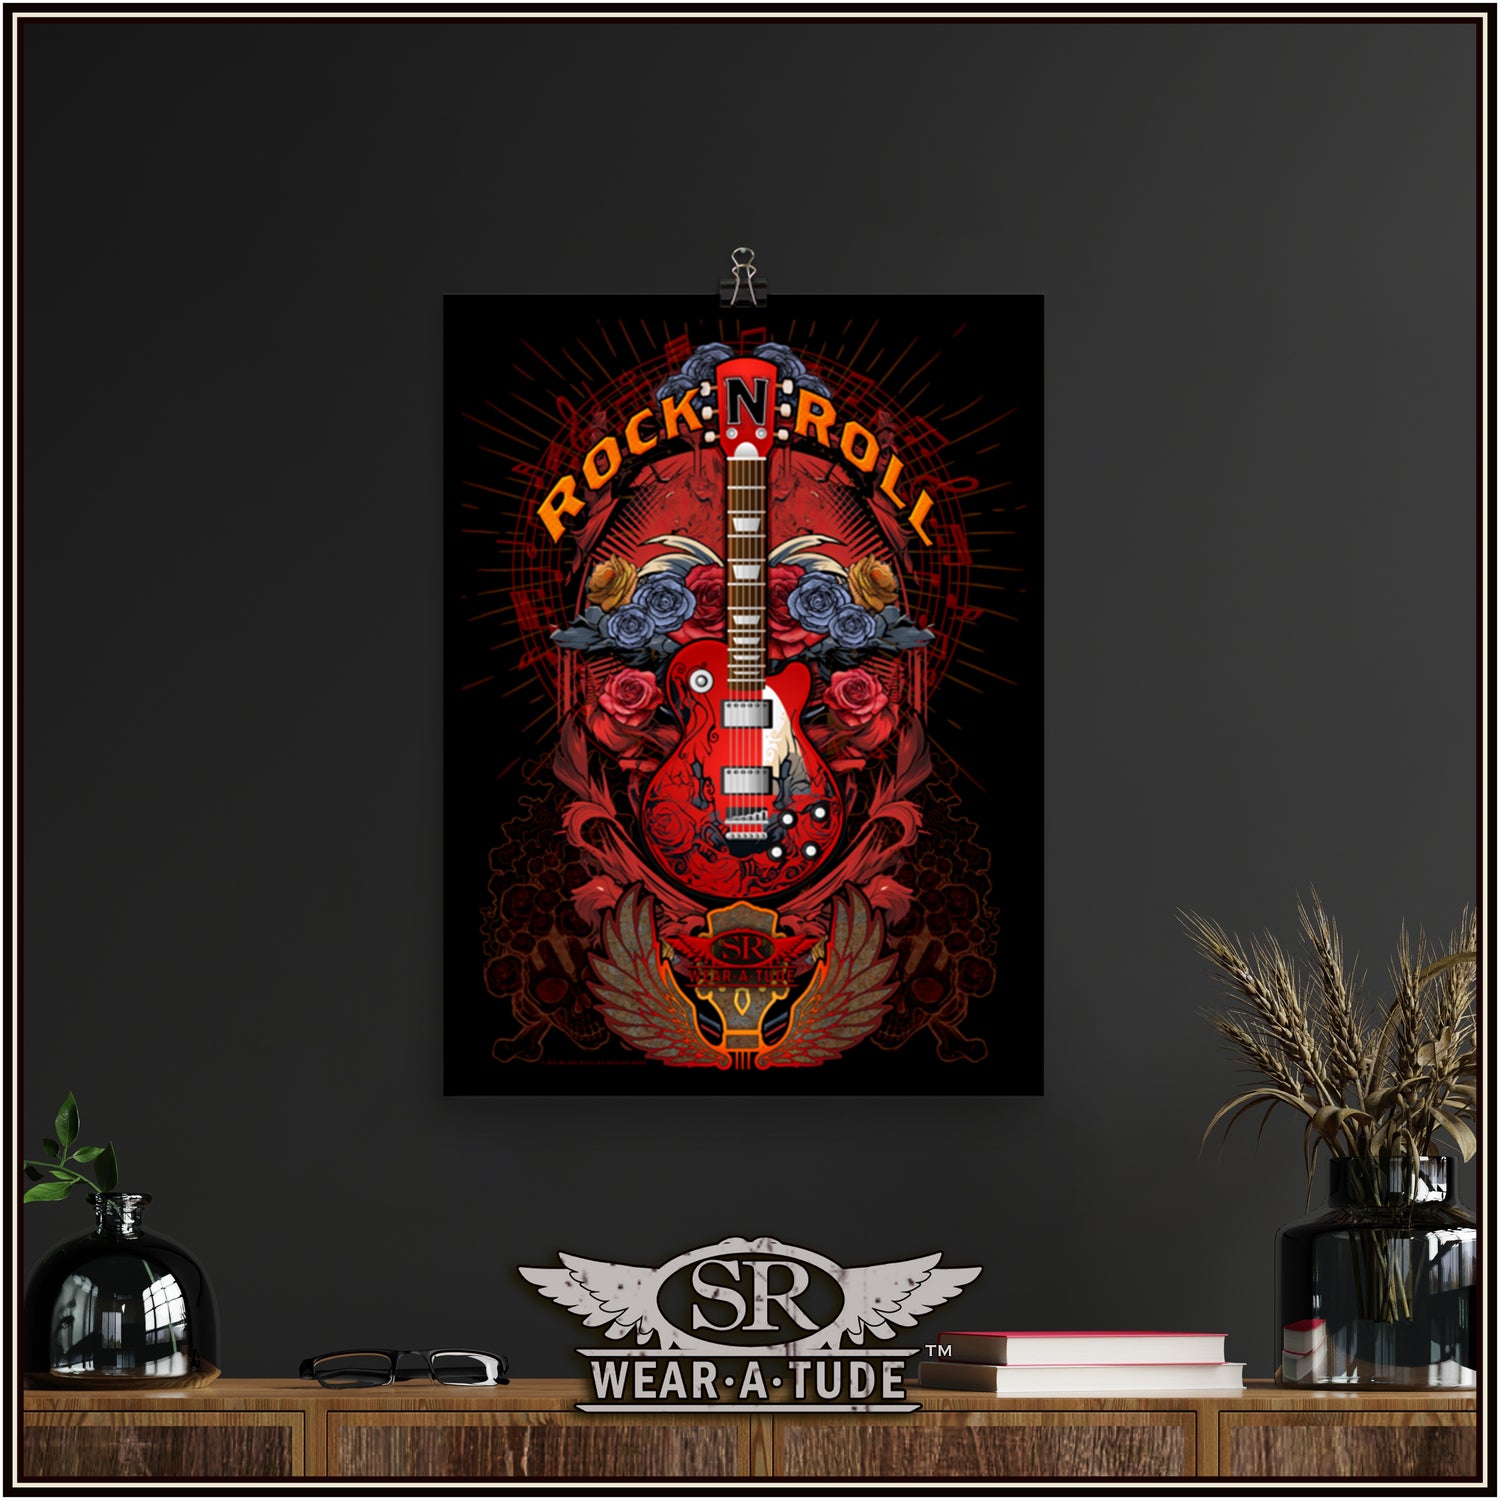 Looking for that slick classic rock and roll art for your music room? This high-resolution image of roses and a guitar on a black isolated background trimmed with our signature intricate style of skull and bone filigree will look epic on any wall. Our museum-quality posters are made on thick matte paper. Add a wonderful accent to your room and office with these quality posters from SR Wear Atude. SibBling Rivalry Design